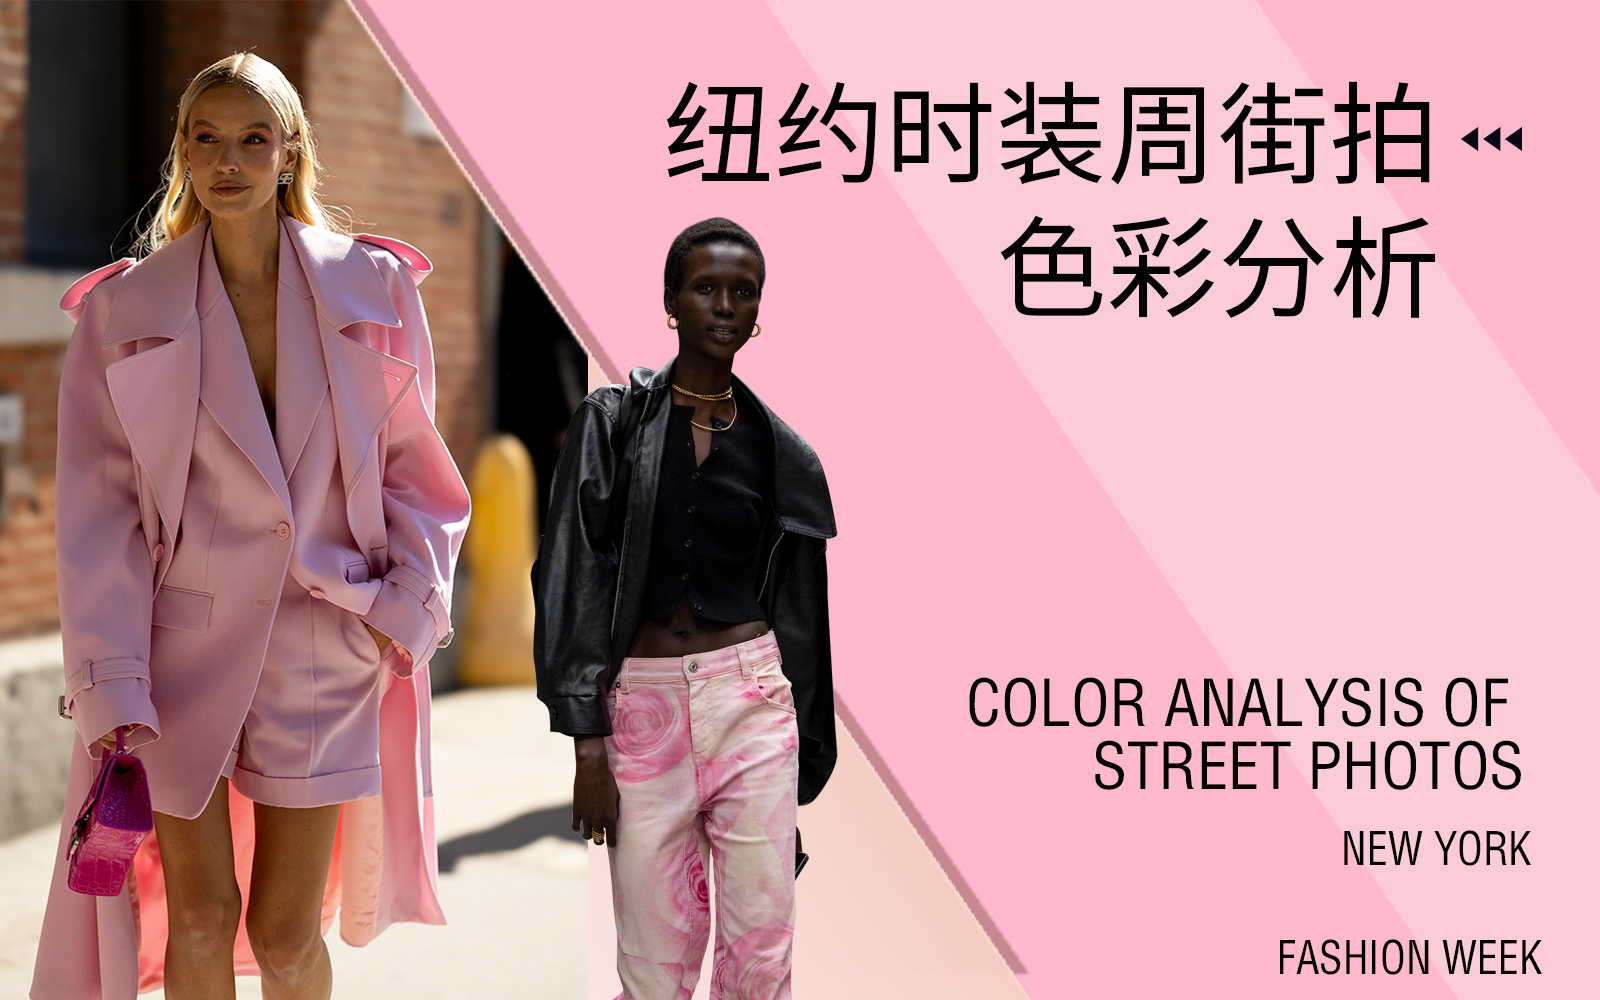 New York Fashion Week -- The Color Analysis of Streetsnaps